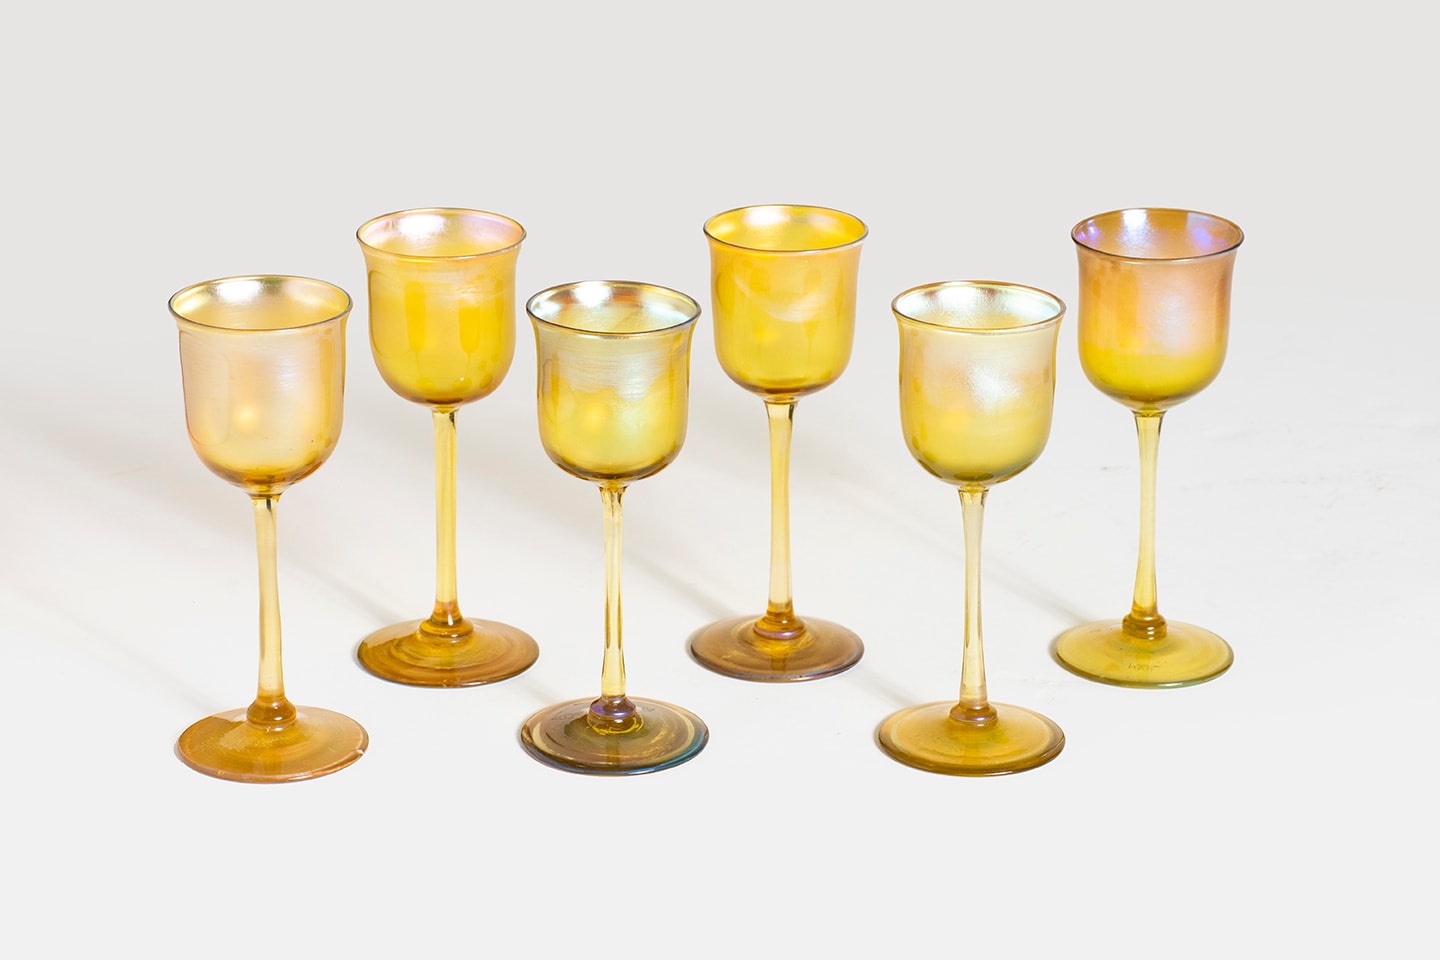 set of 6 gold iridescent tiffany favrile glass drinking glasses for liqueurs, yellowy base glass with bright shiny rainbow silver iridescence, the glasses with shallow slightly flared cups, thin stems and rounded flat feet.